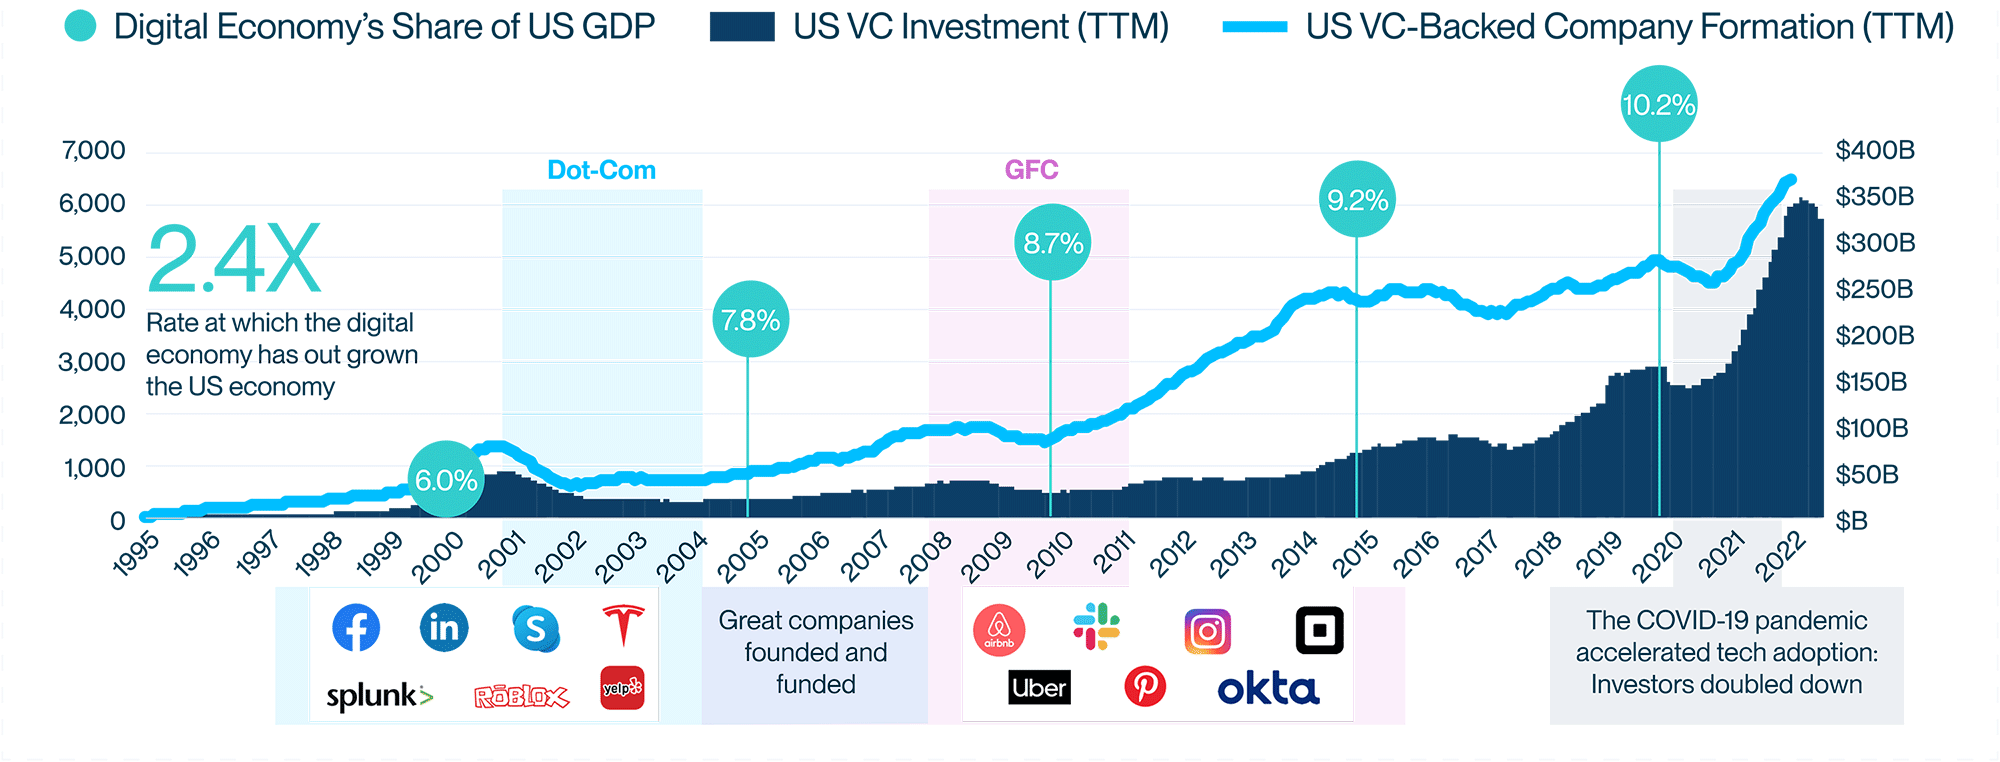 US_VC_investment_and_company_formation1.png